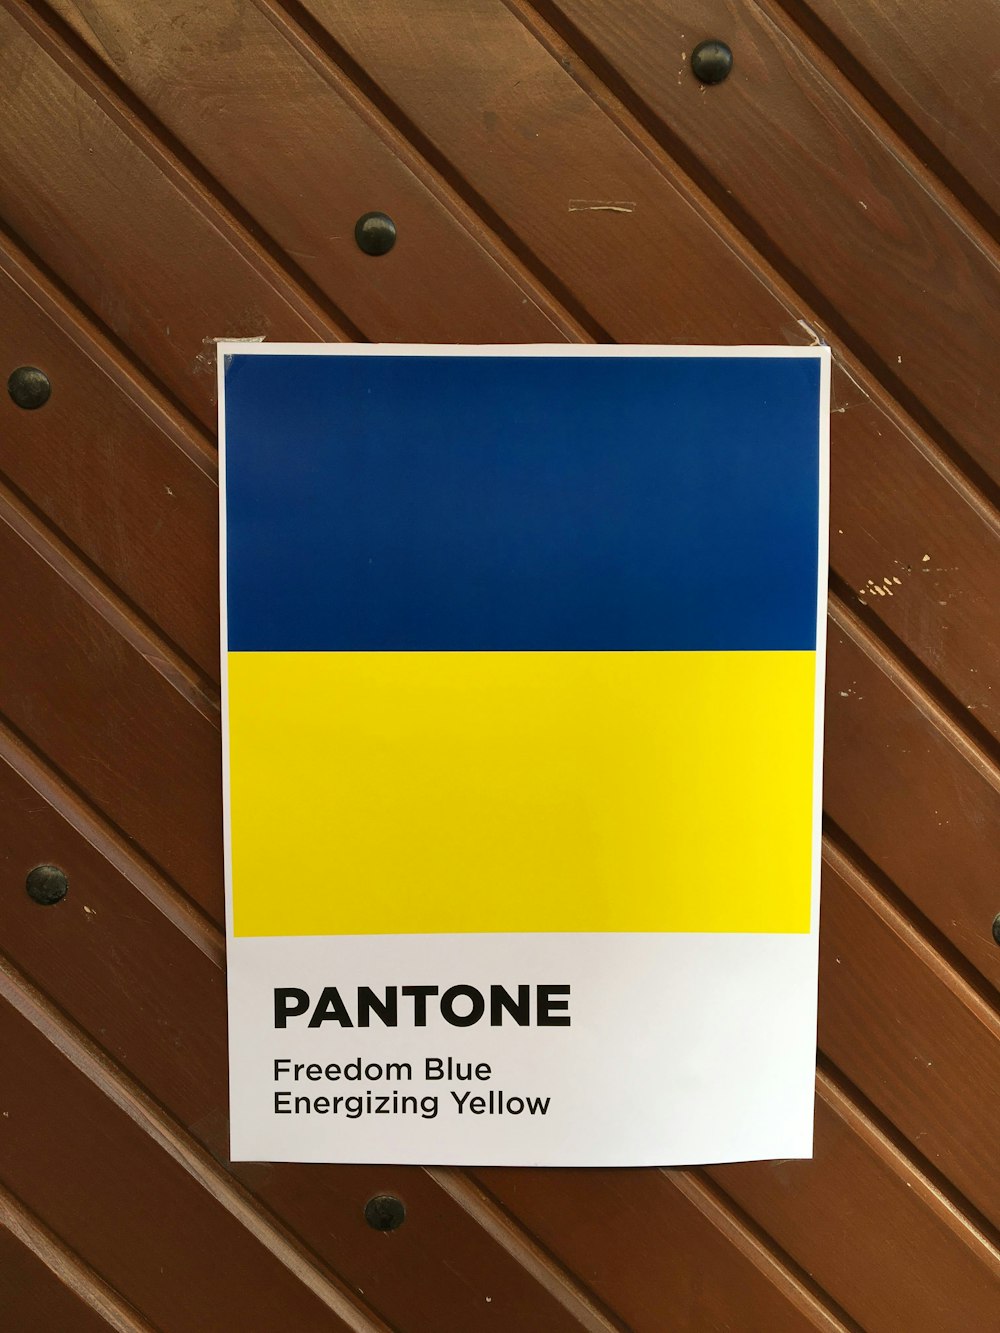 a yellow and blue sign on a wooden surface